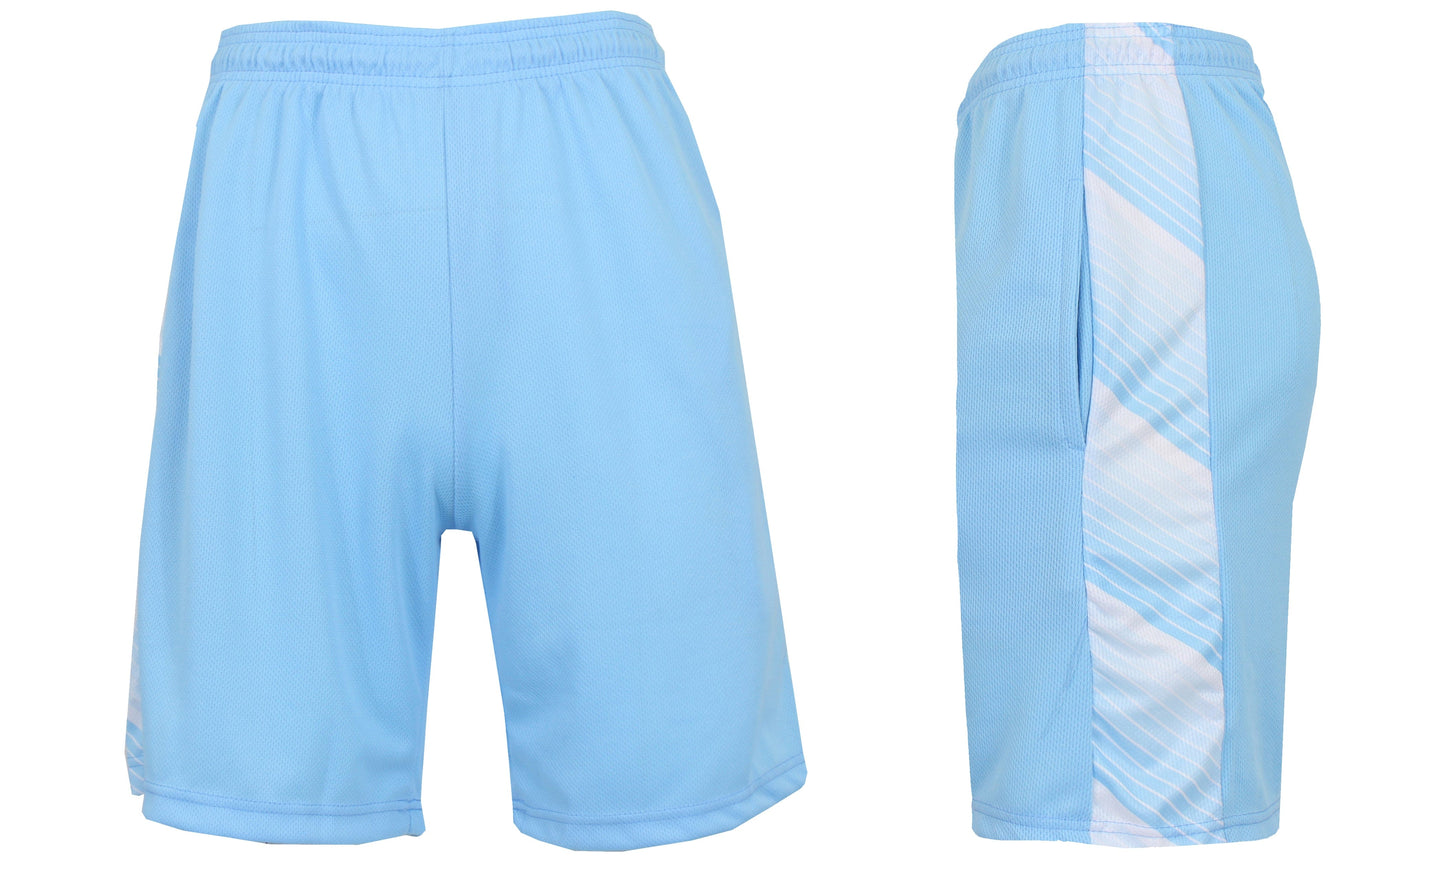 Men's Active Mesh Shorts With Side Trim Design - GalaxybyHarvic